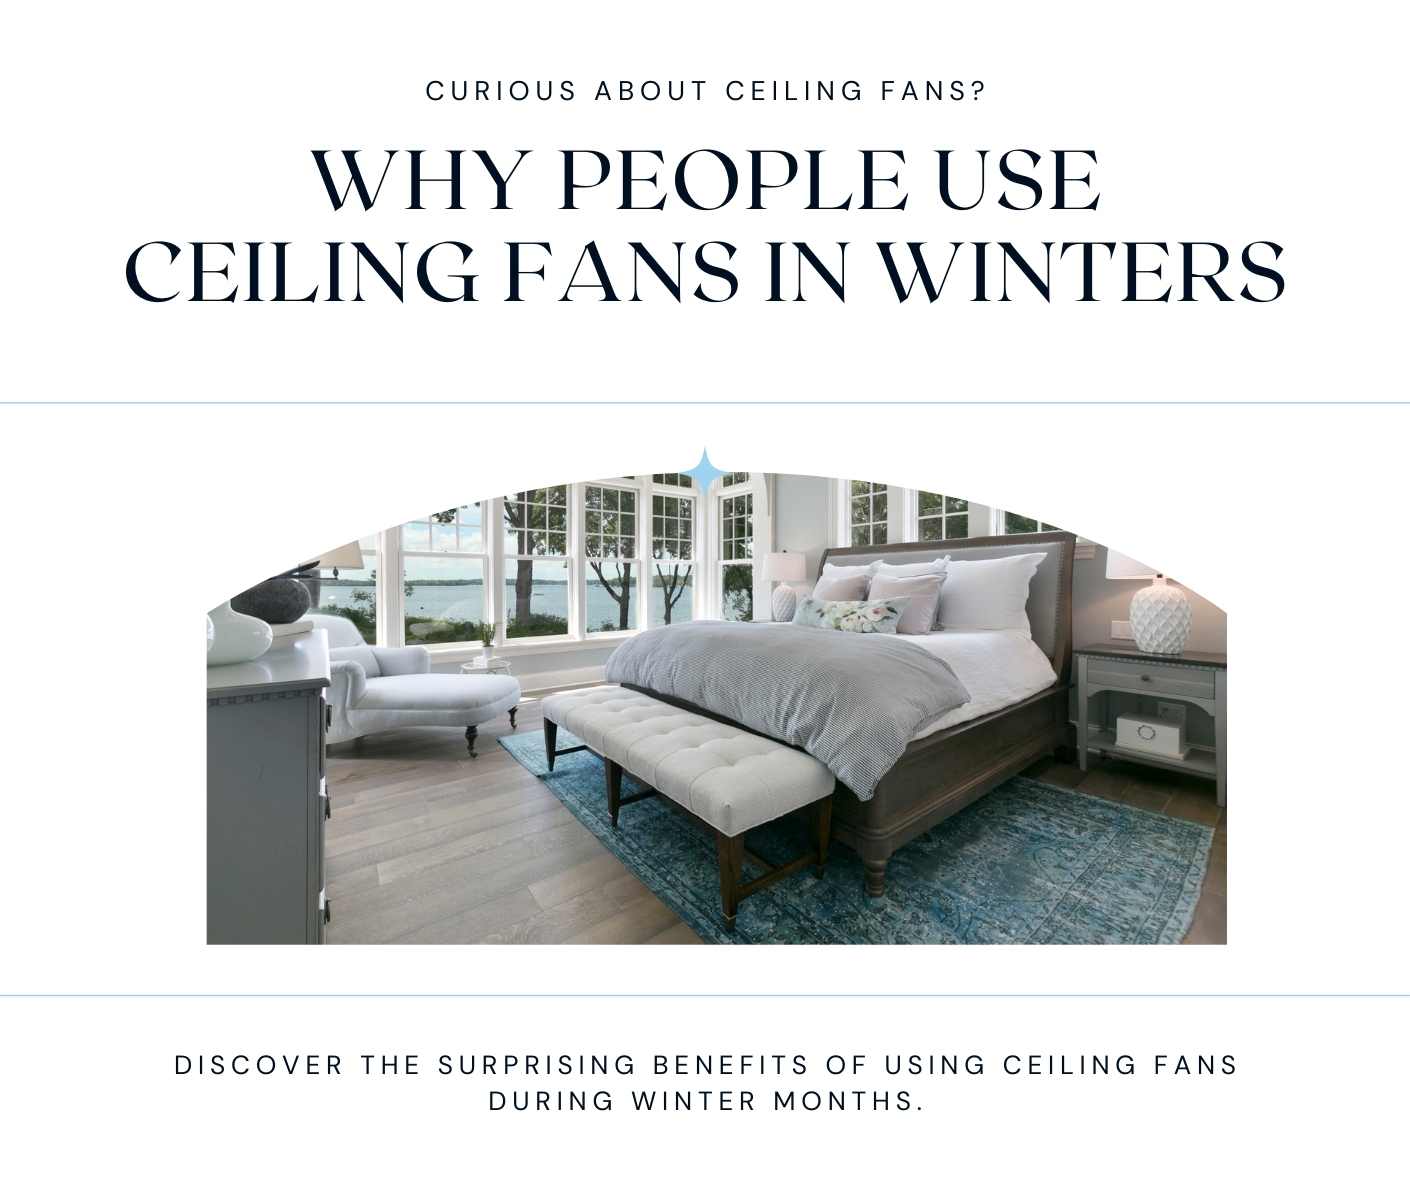 Why Do People Use Ceiling Fans in Winters?